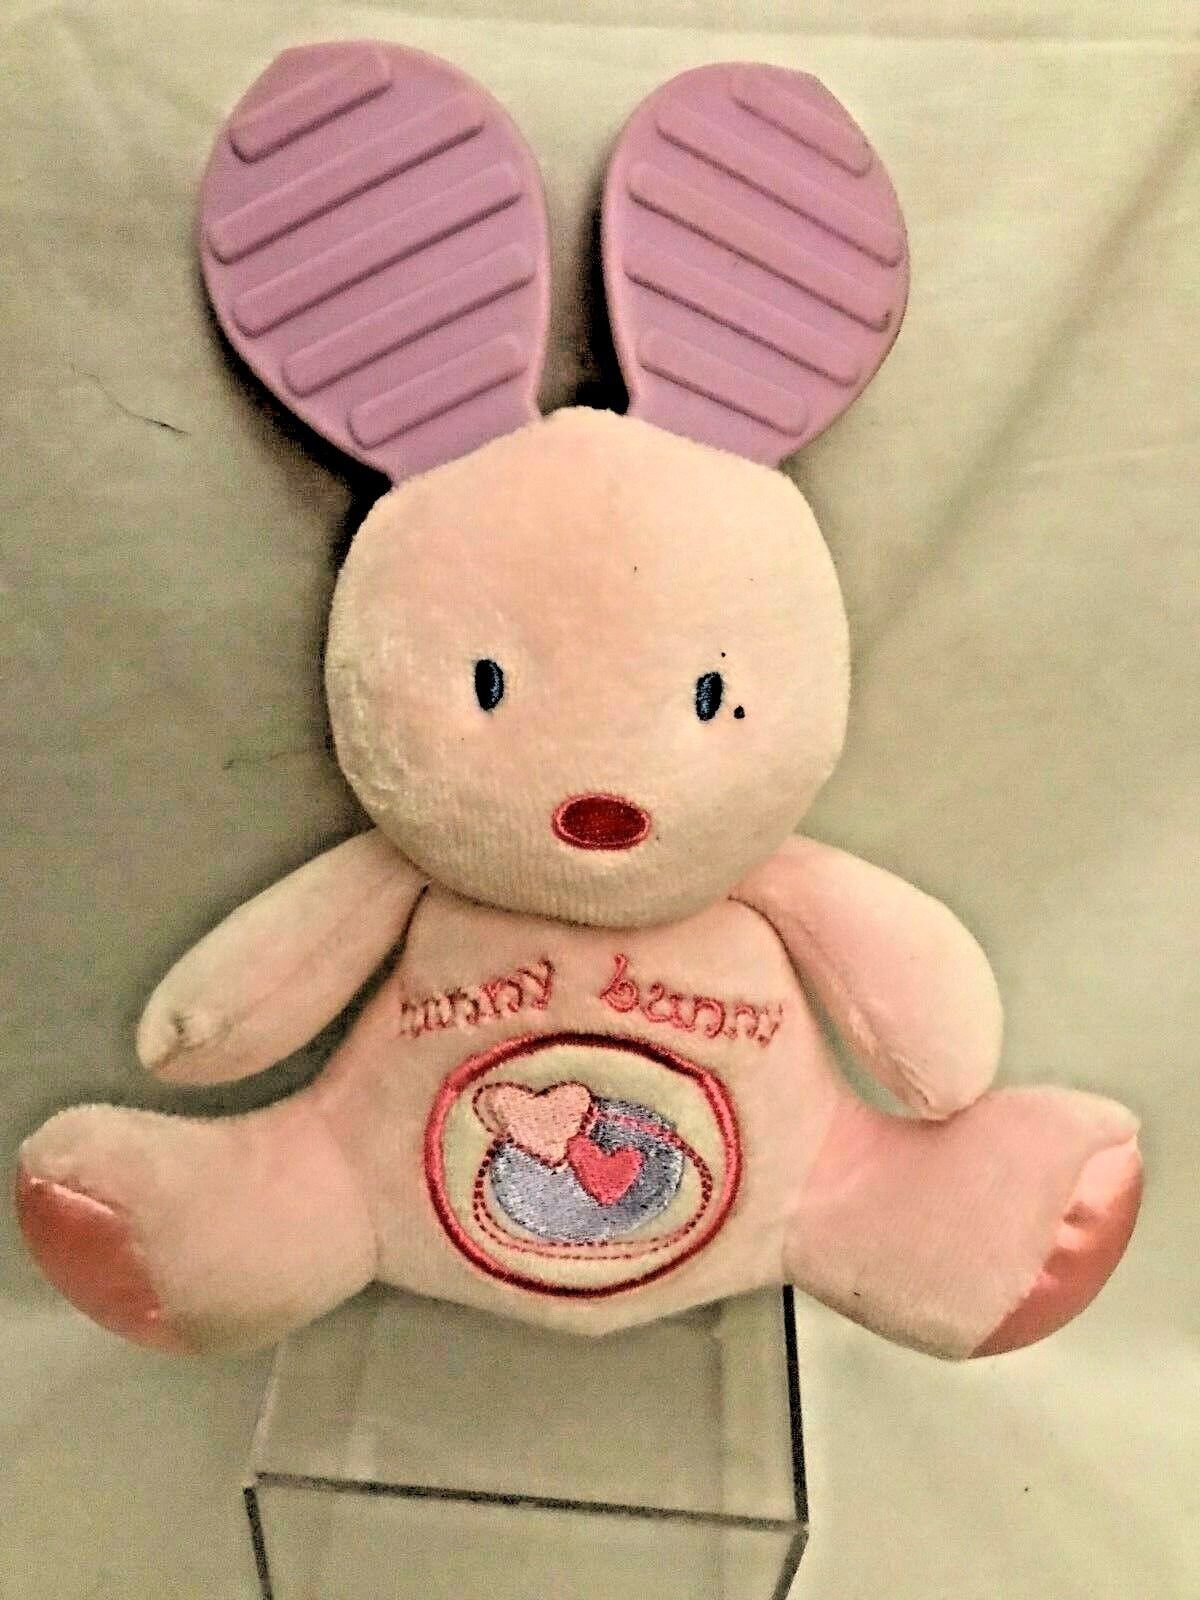 KIDS PREFERRED 8” Baby BUNNY TEETHER ALLERGY FRIENDLY Plush FREE SHIPPING